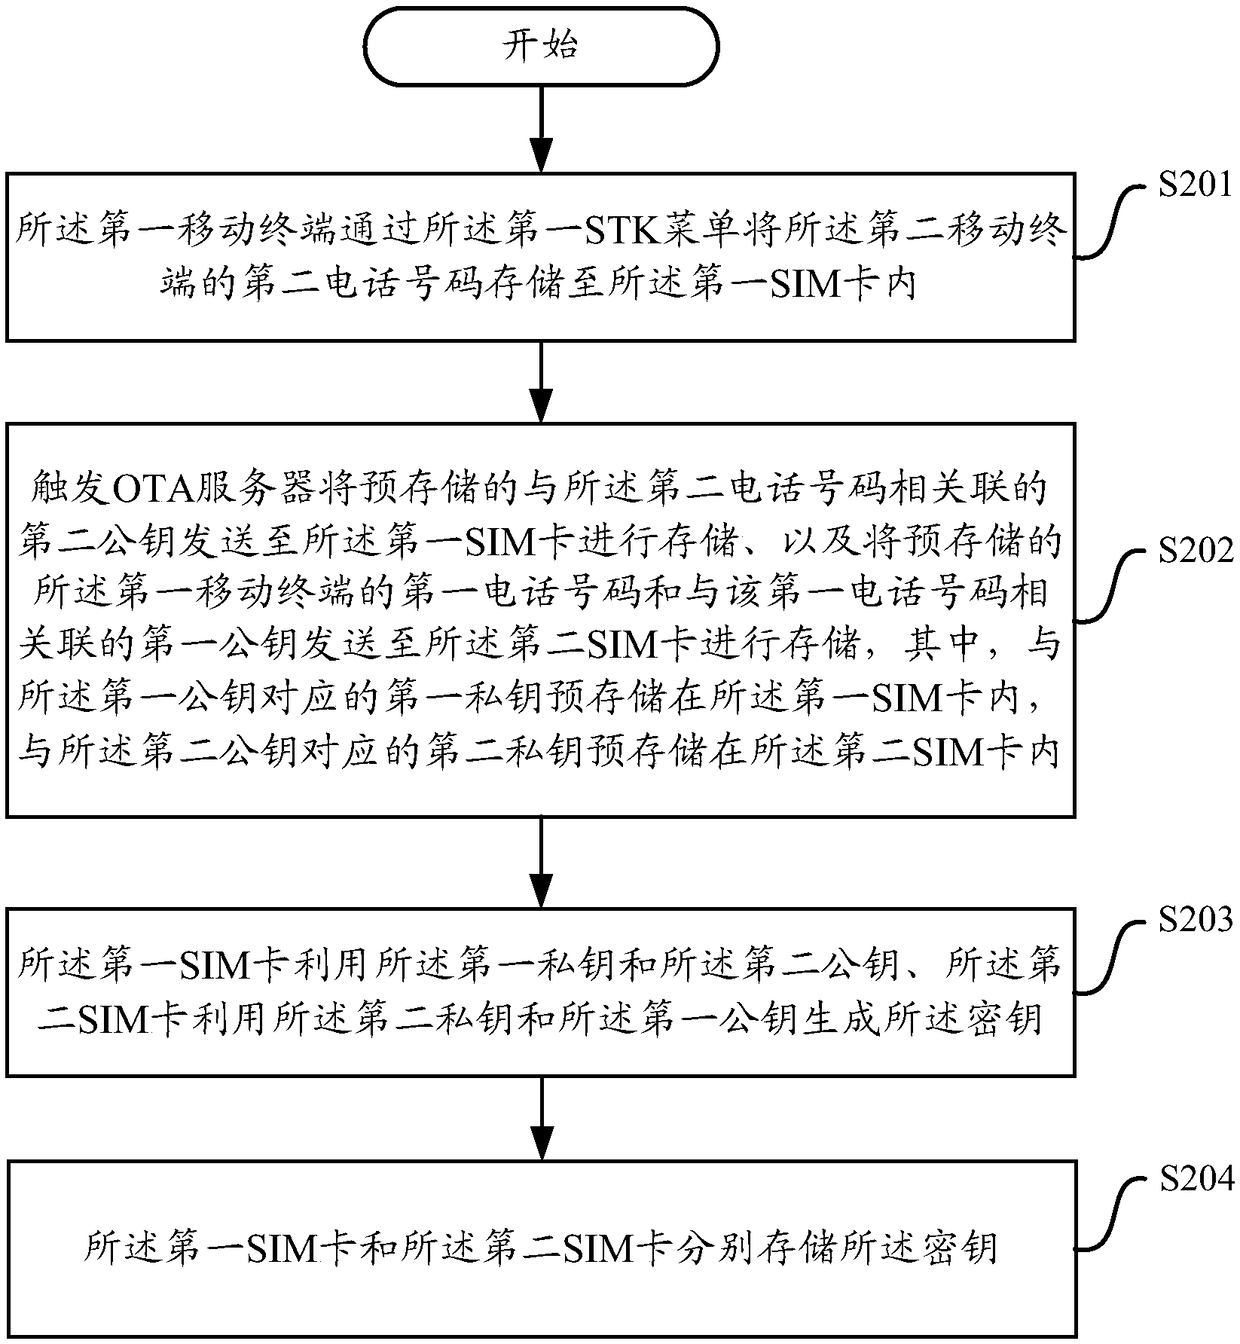 Method and system for voice communication encryption and decryption